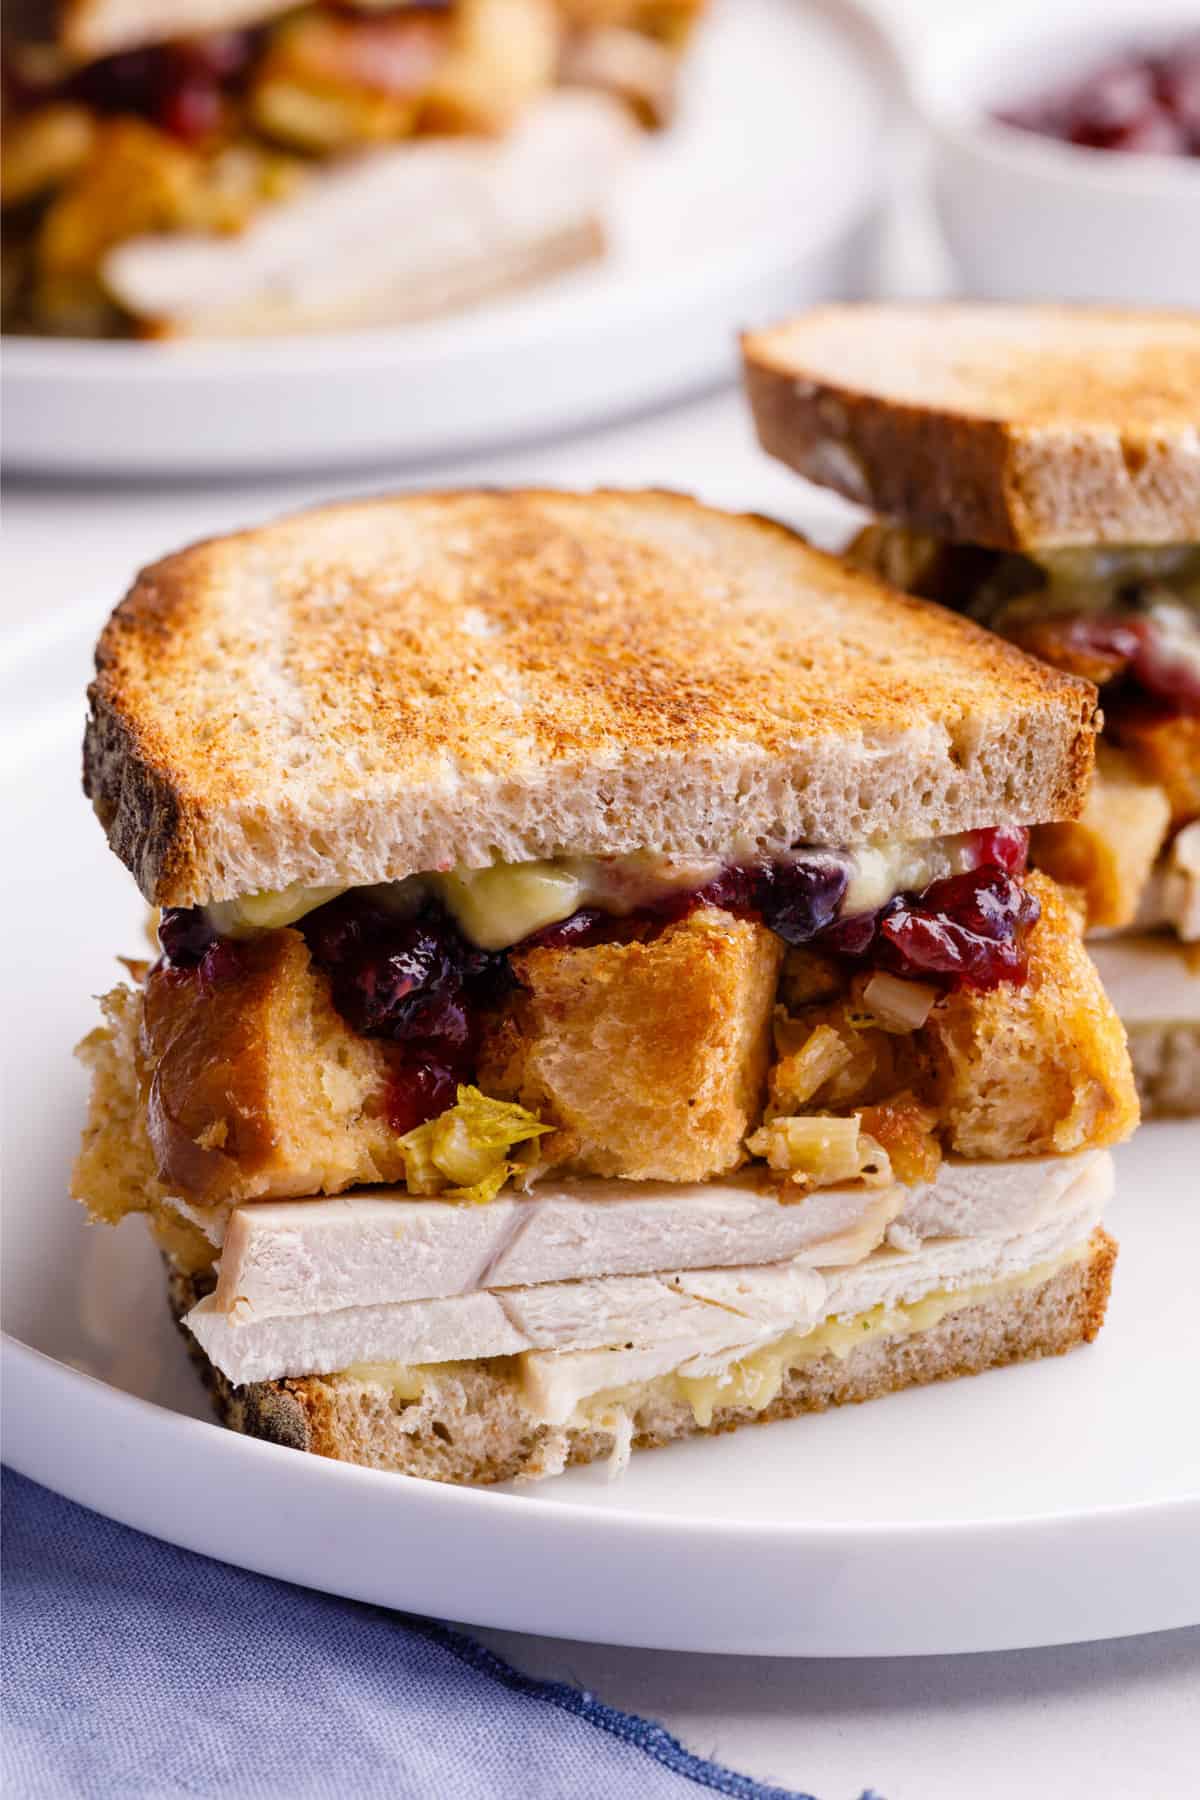 close up image of the cross section of the leftover turkey sandwich